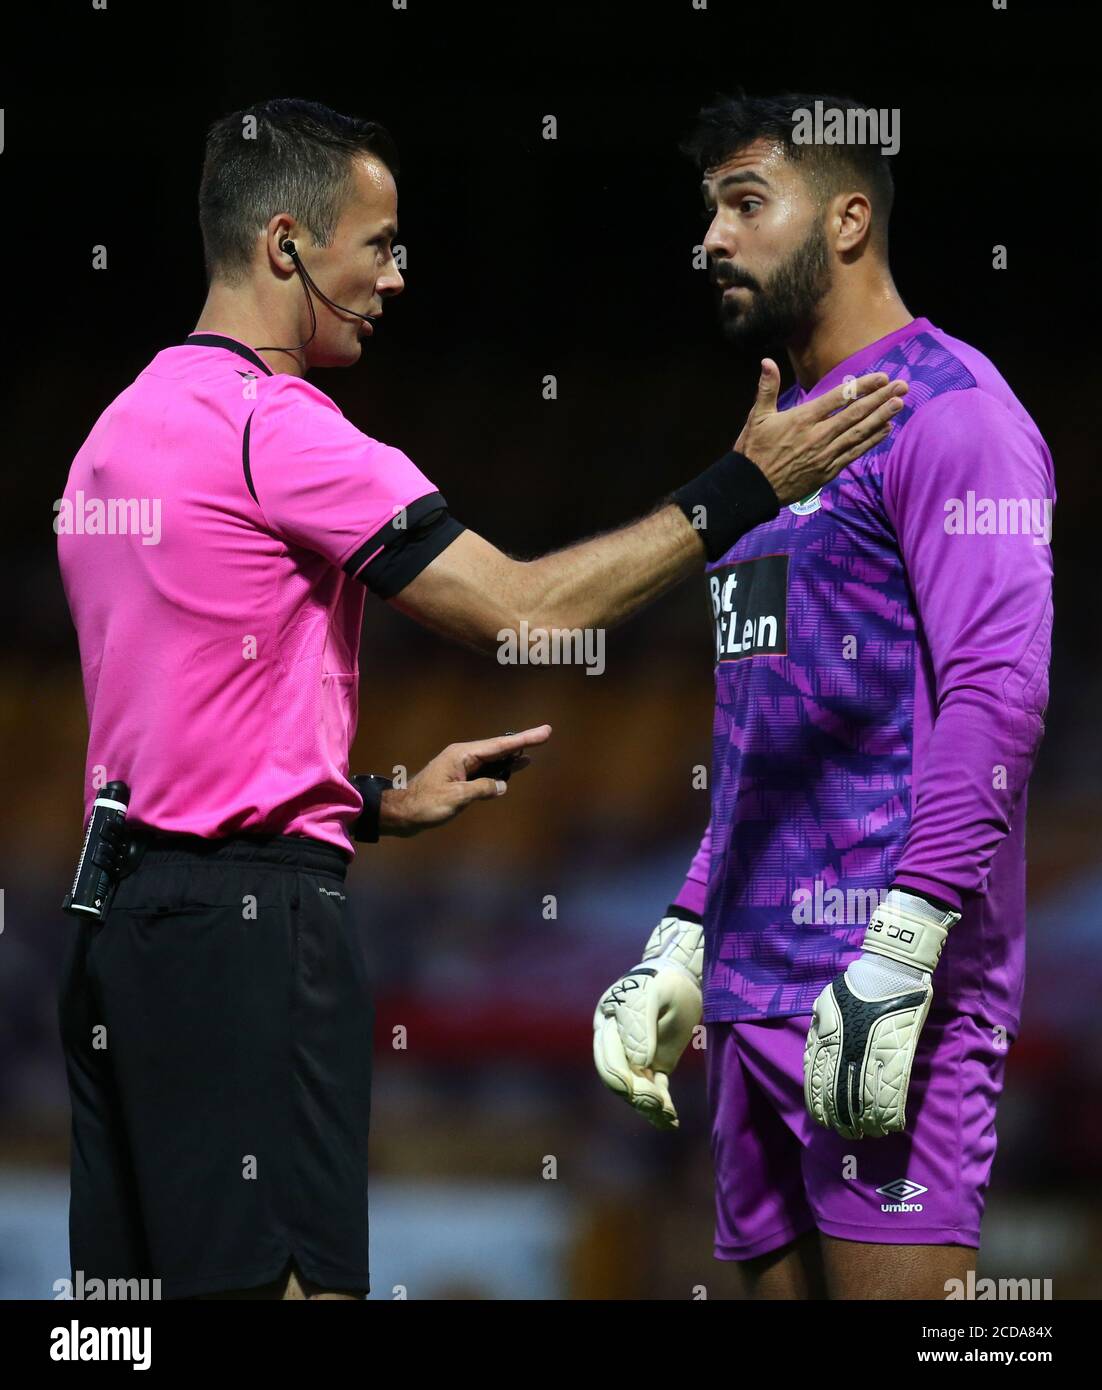 Glentoran's Dayle Coleing (right) and referee Bram Van Driessche during the UEFA Europa League qualifying first round match at Fir Park, Motherwell. Stock Photo